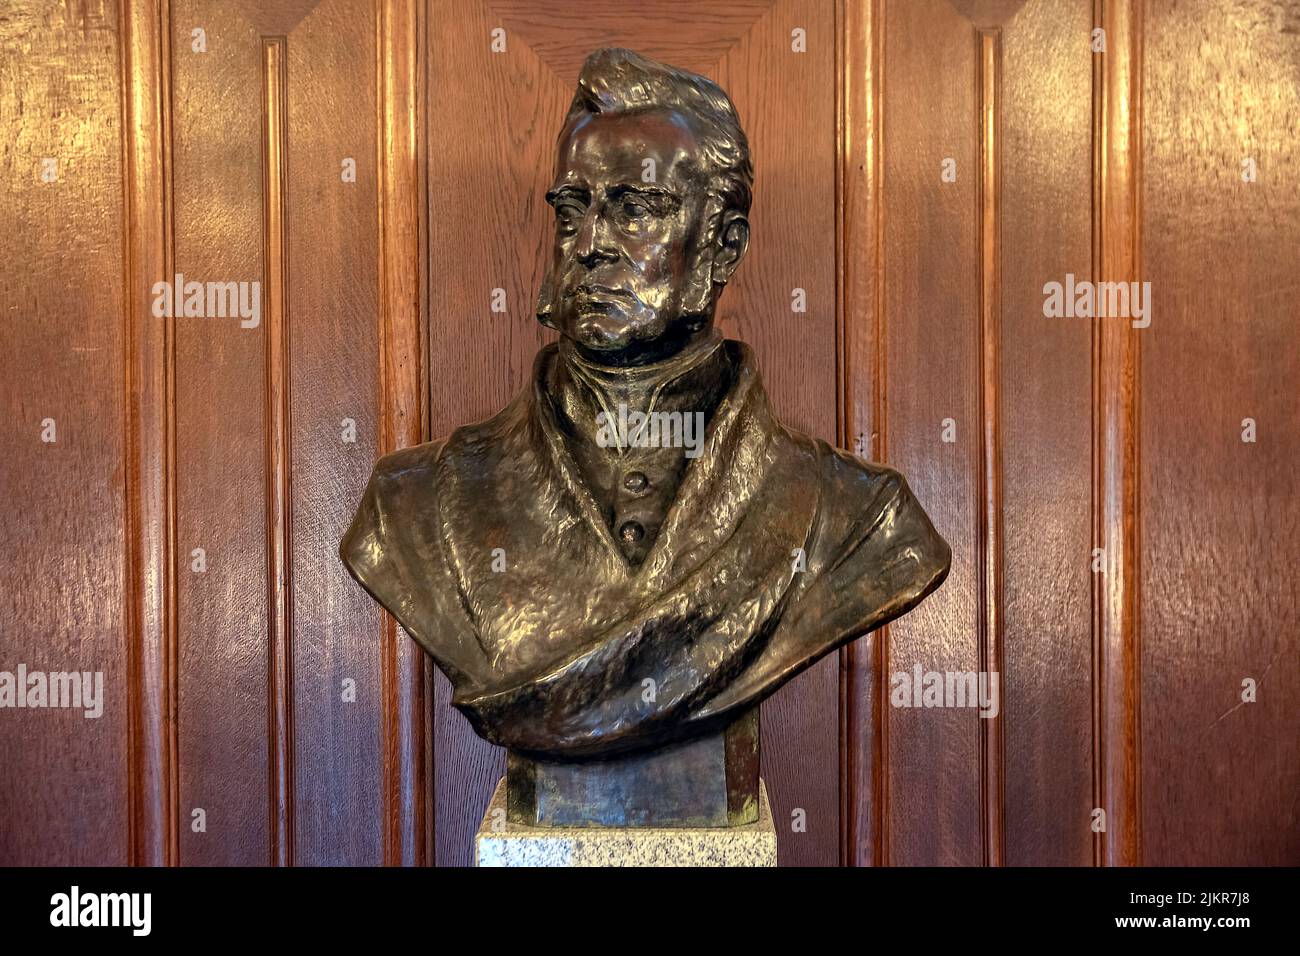 Statue King Willem I At Amsterdam The Netherlands 15-8-2020 Stock Photo